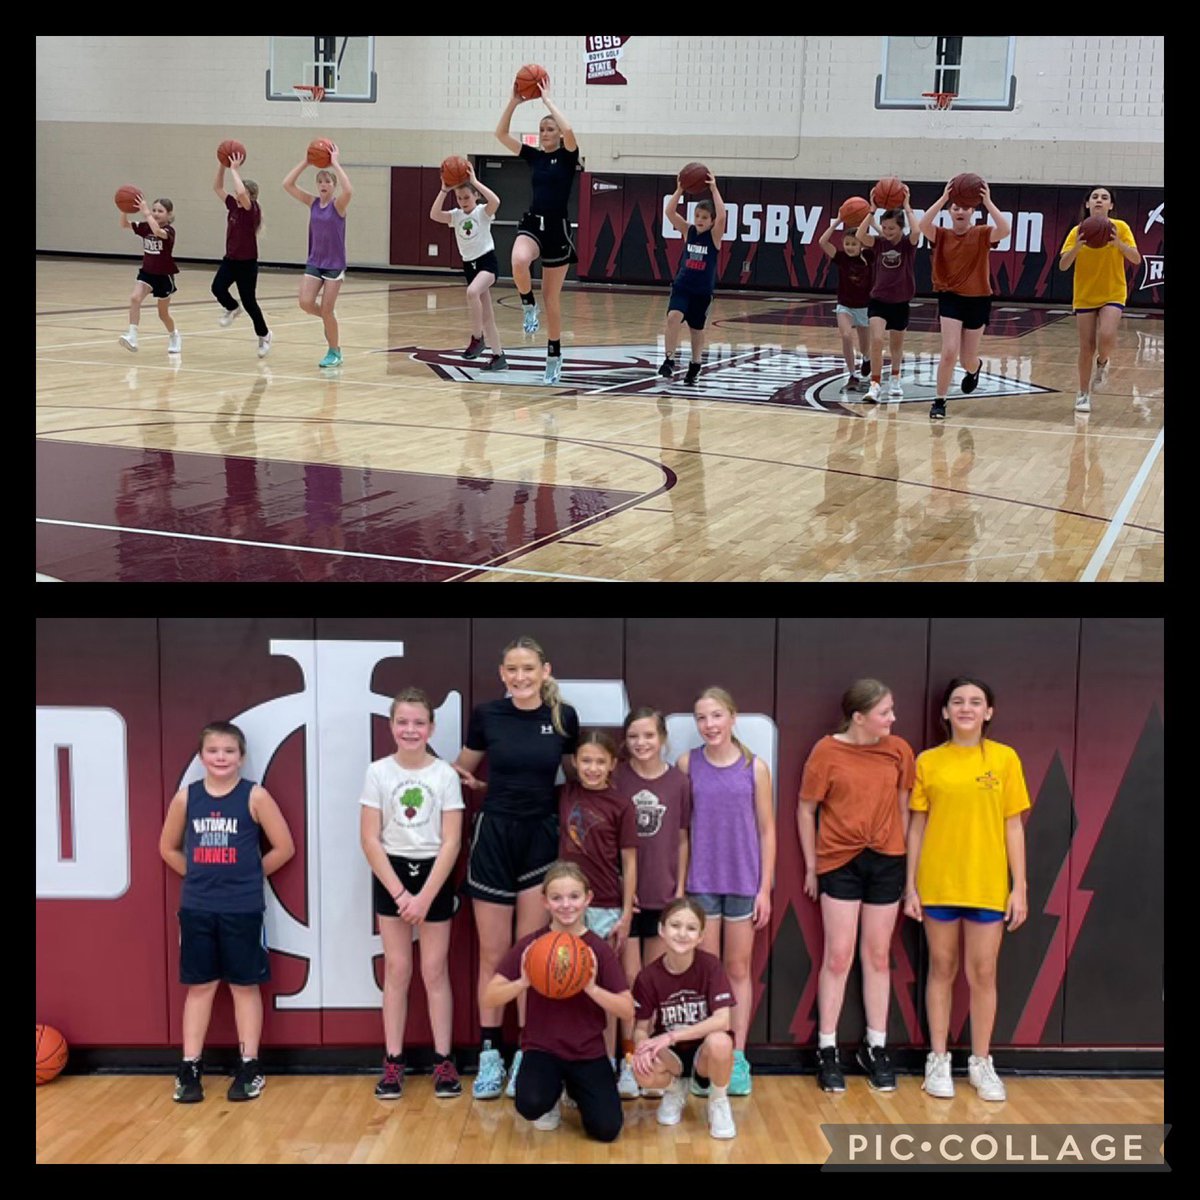 Had a great time working this weekend with some future Ranger hoopers!🏀 #GoCIGo #Rangerway